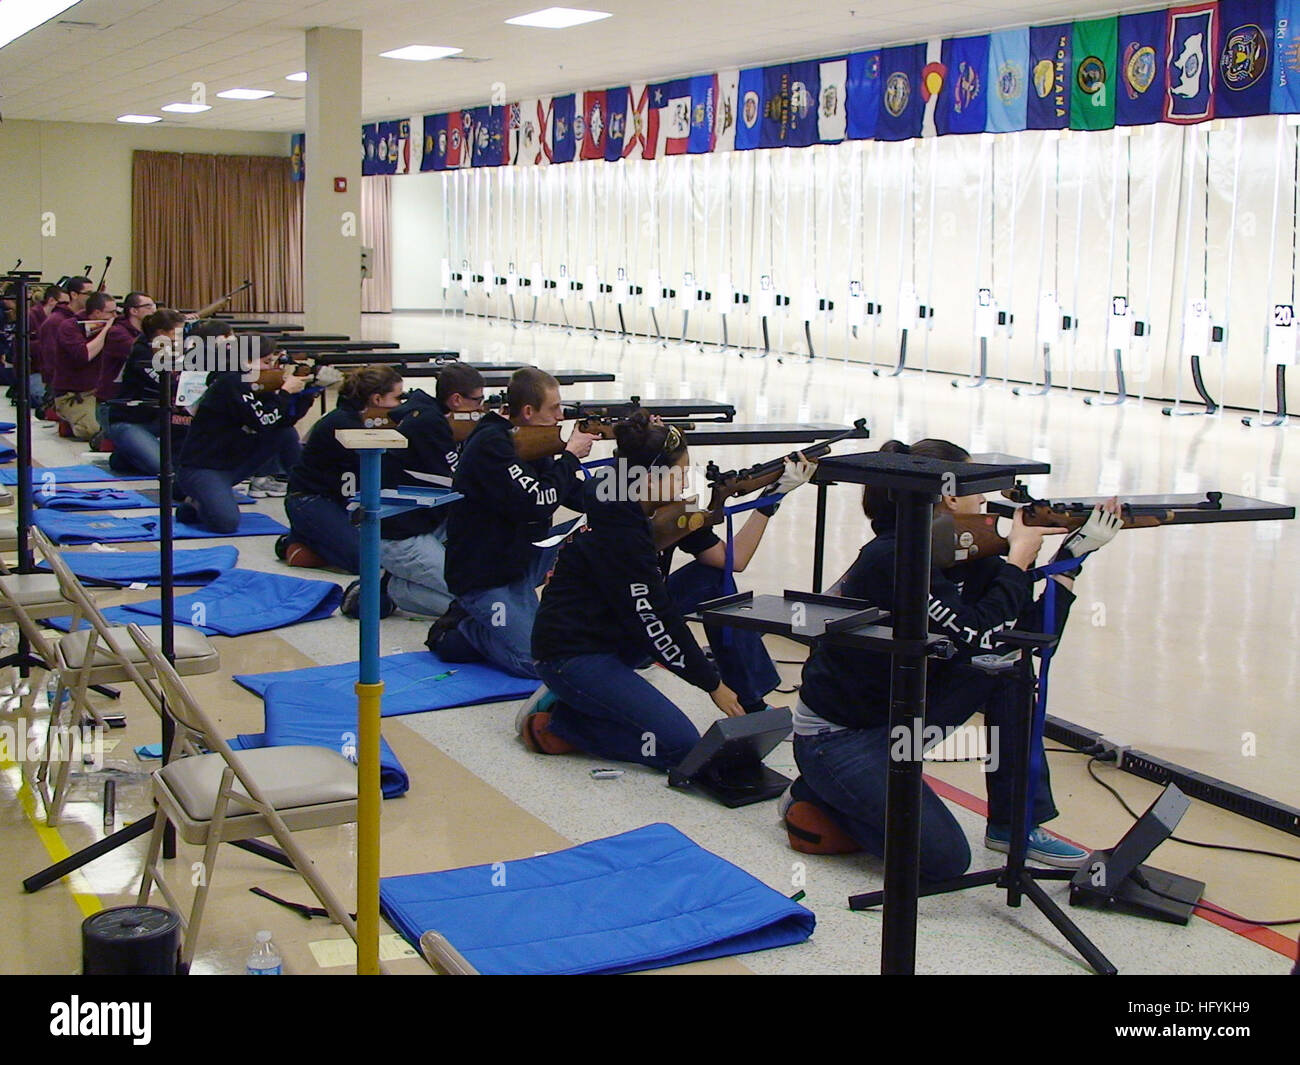 110212-N-FO977-327 ANNISTON, Ala. (Feb. 12, 2011) Navy Junior Reserve Officers Training Corps (NJROTC) sporter division cadets line up in the kneeling firing position as they prepare to fire their first shots during the 2011 NJROTC Air Rifle Championship in Anniston, Ala. Approximately 200 NJROTC cadets from 51 high schools across the United States participated in the competition. (U.S. Navy photo by Mike Miller/Released) US Navy 110212-N-FO977-327 Navy Junior Reserve Officers Training Corps sporter division cadets line up in the kneeling firing position as they prep Stock Photo